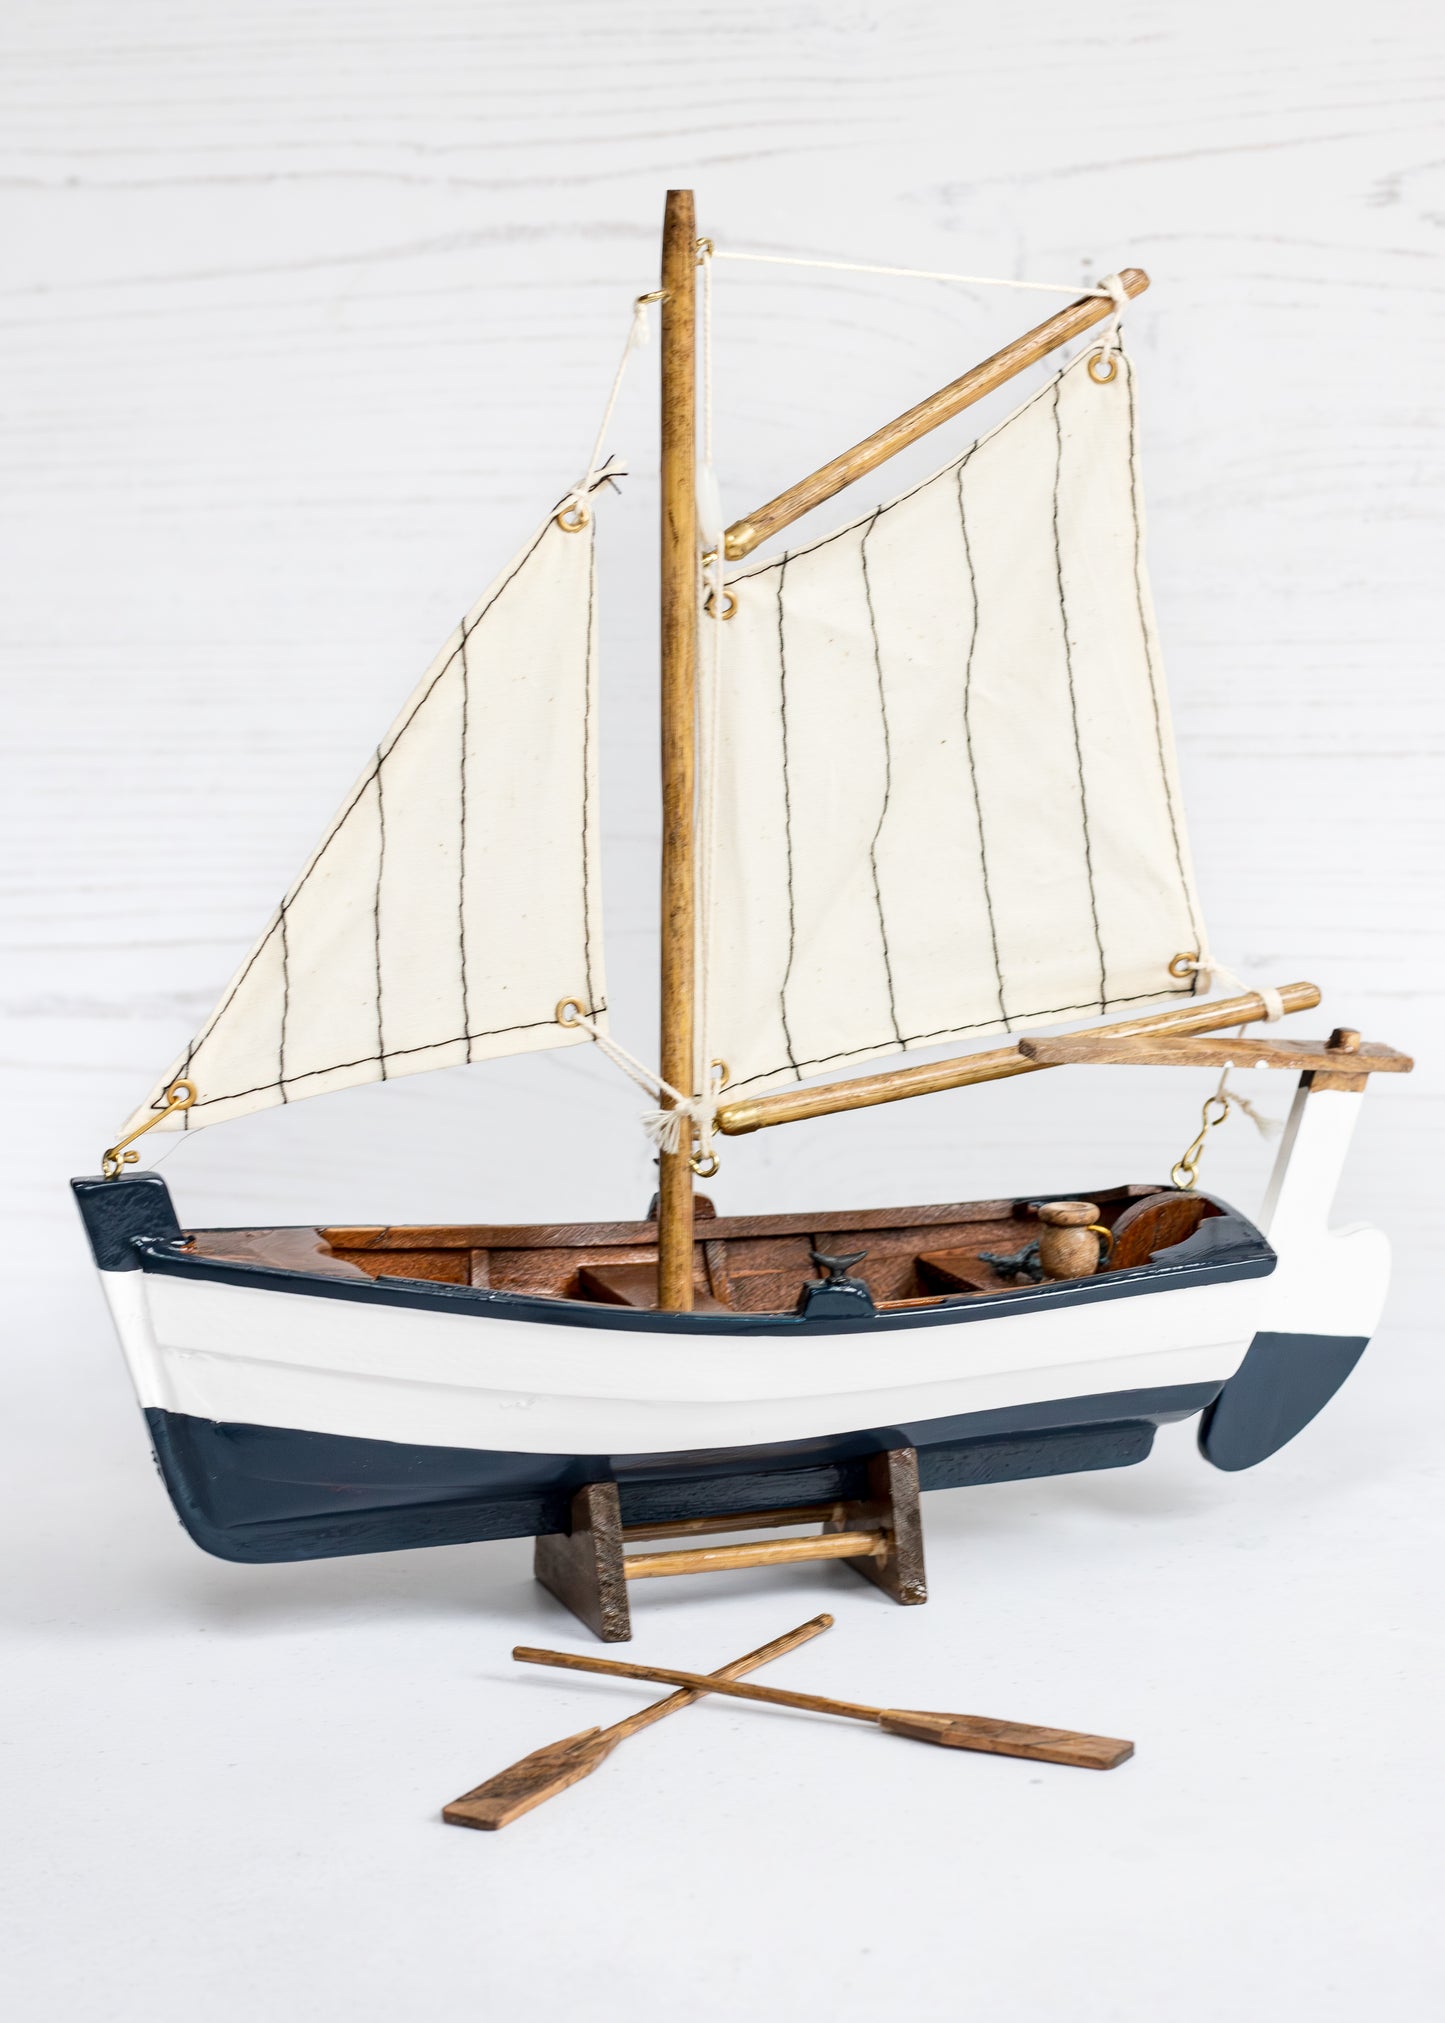 Model Sailing Boat with Oars